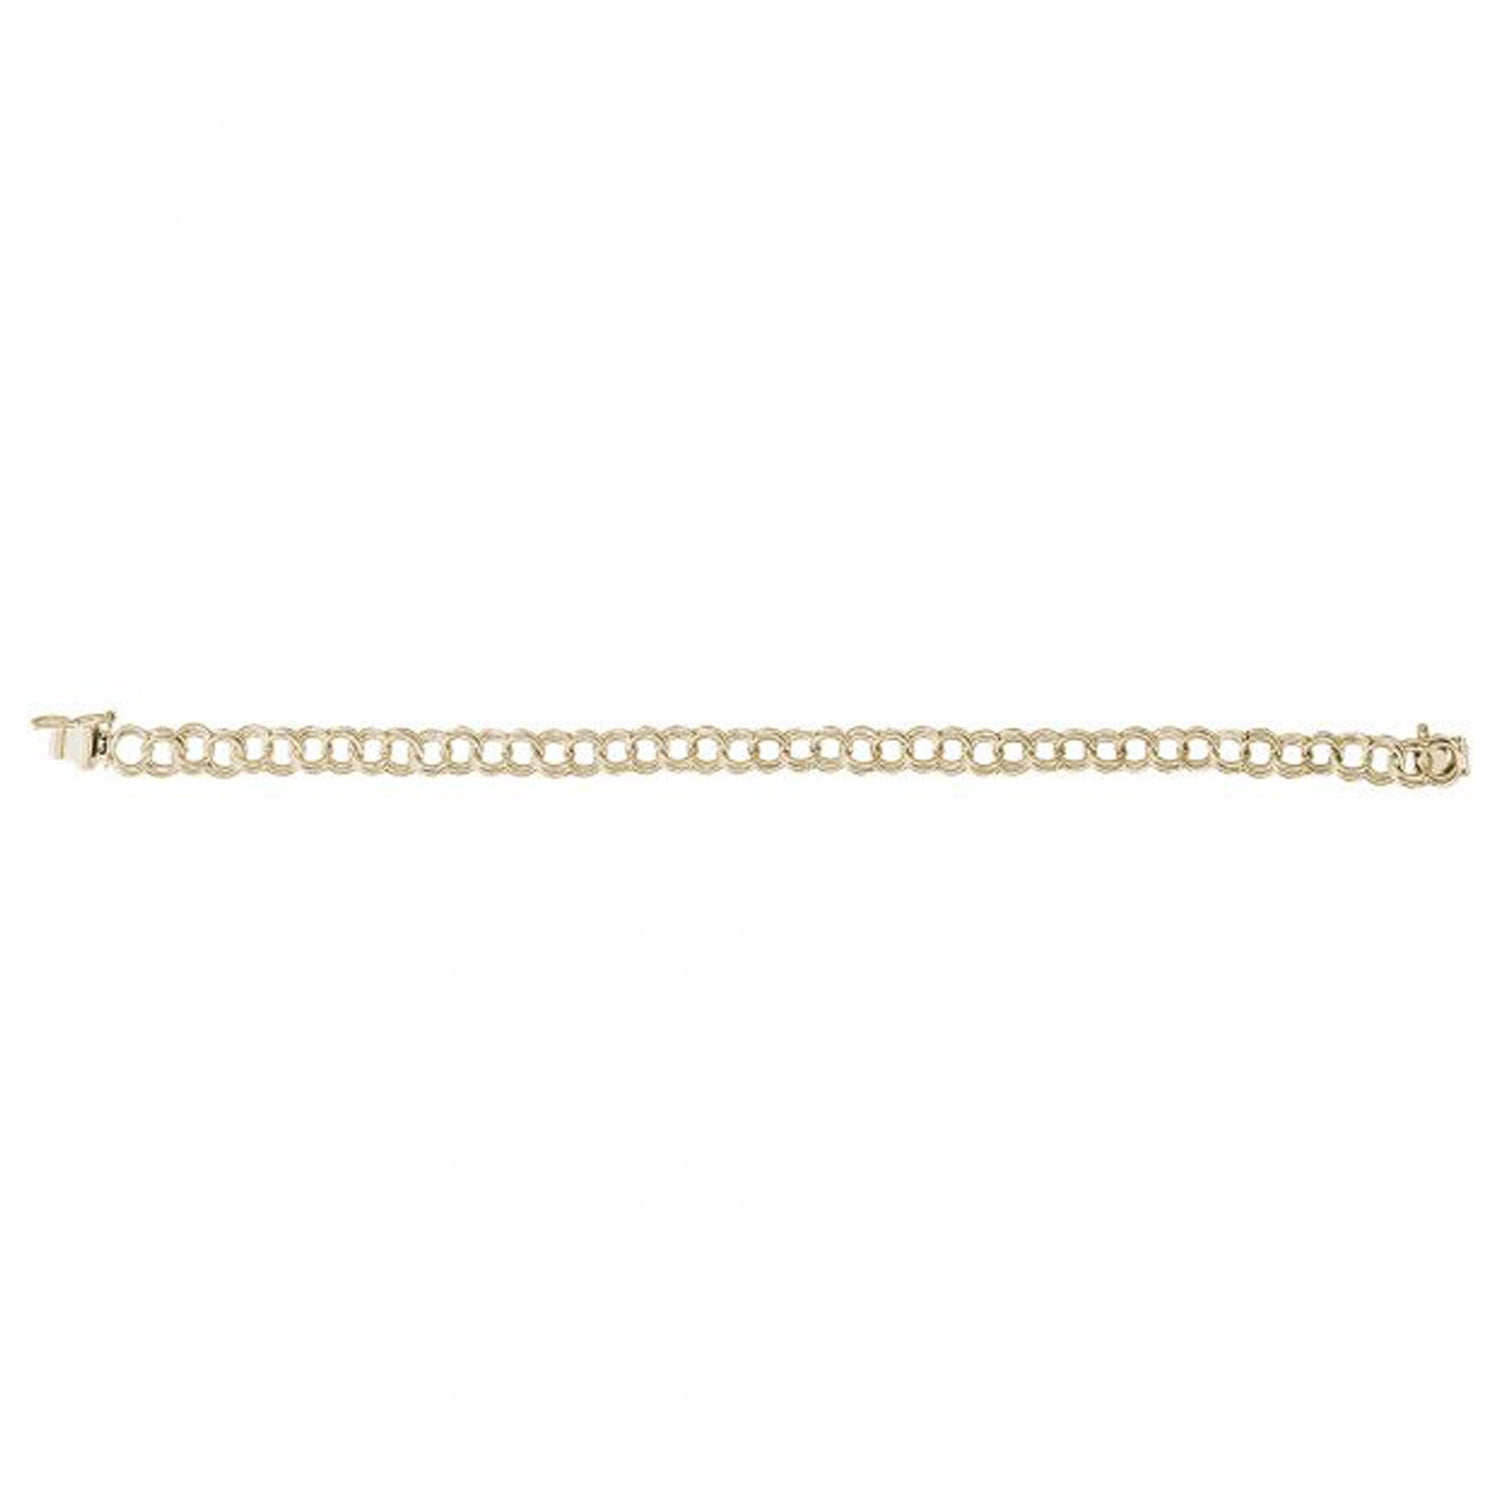 Double Curb Link Charm Bracelet in 10kt Yellow Gold (7 inches)